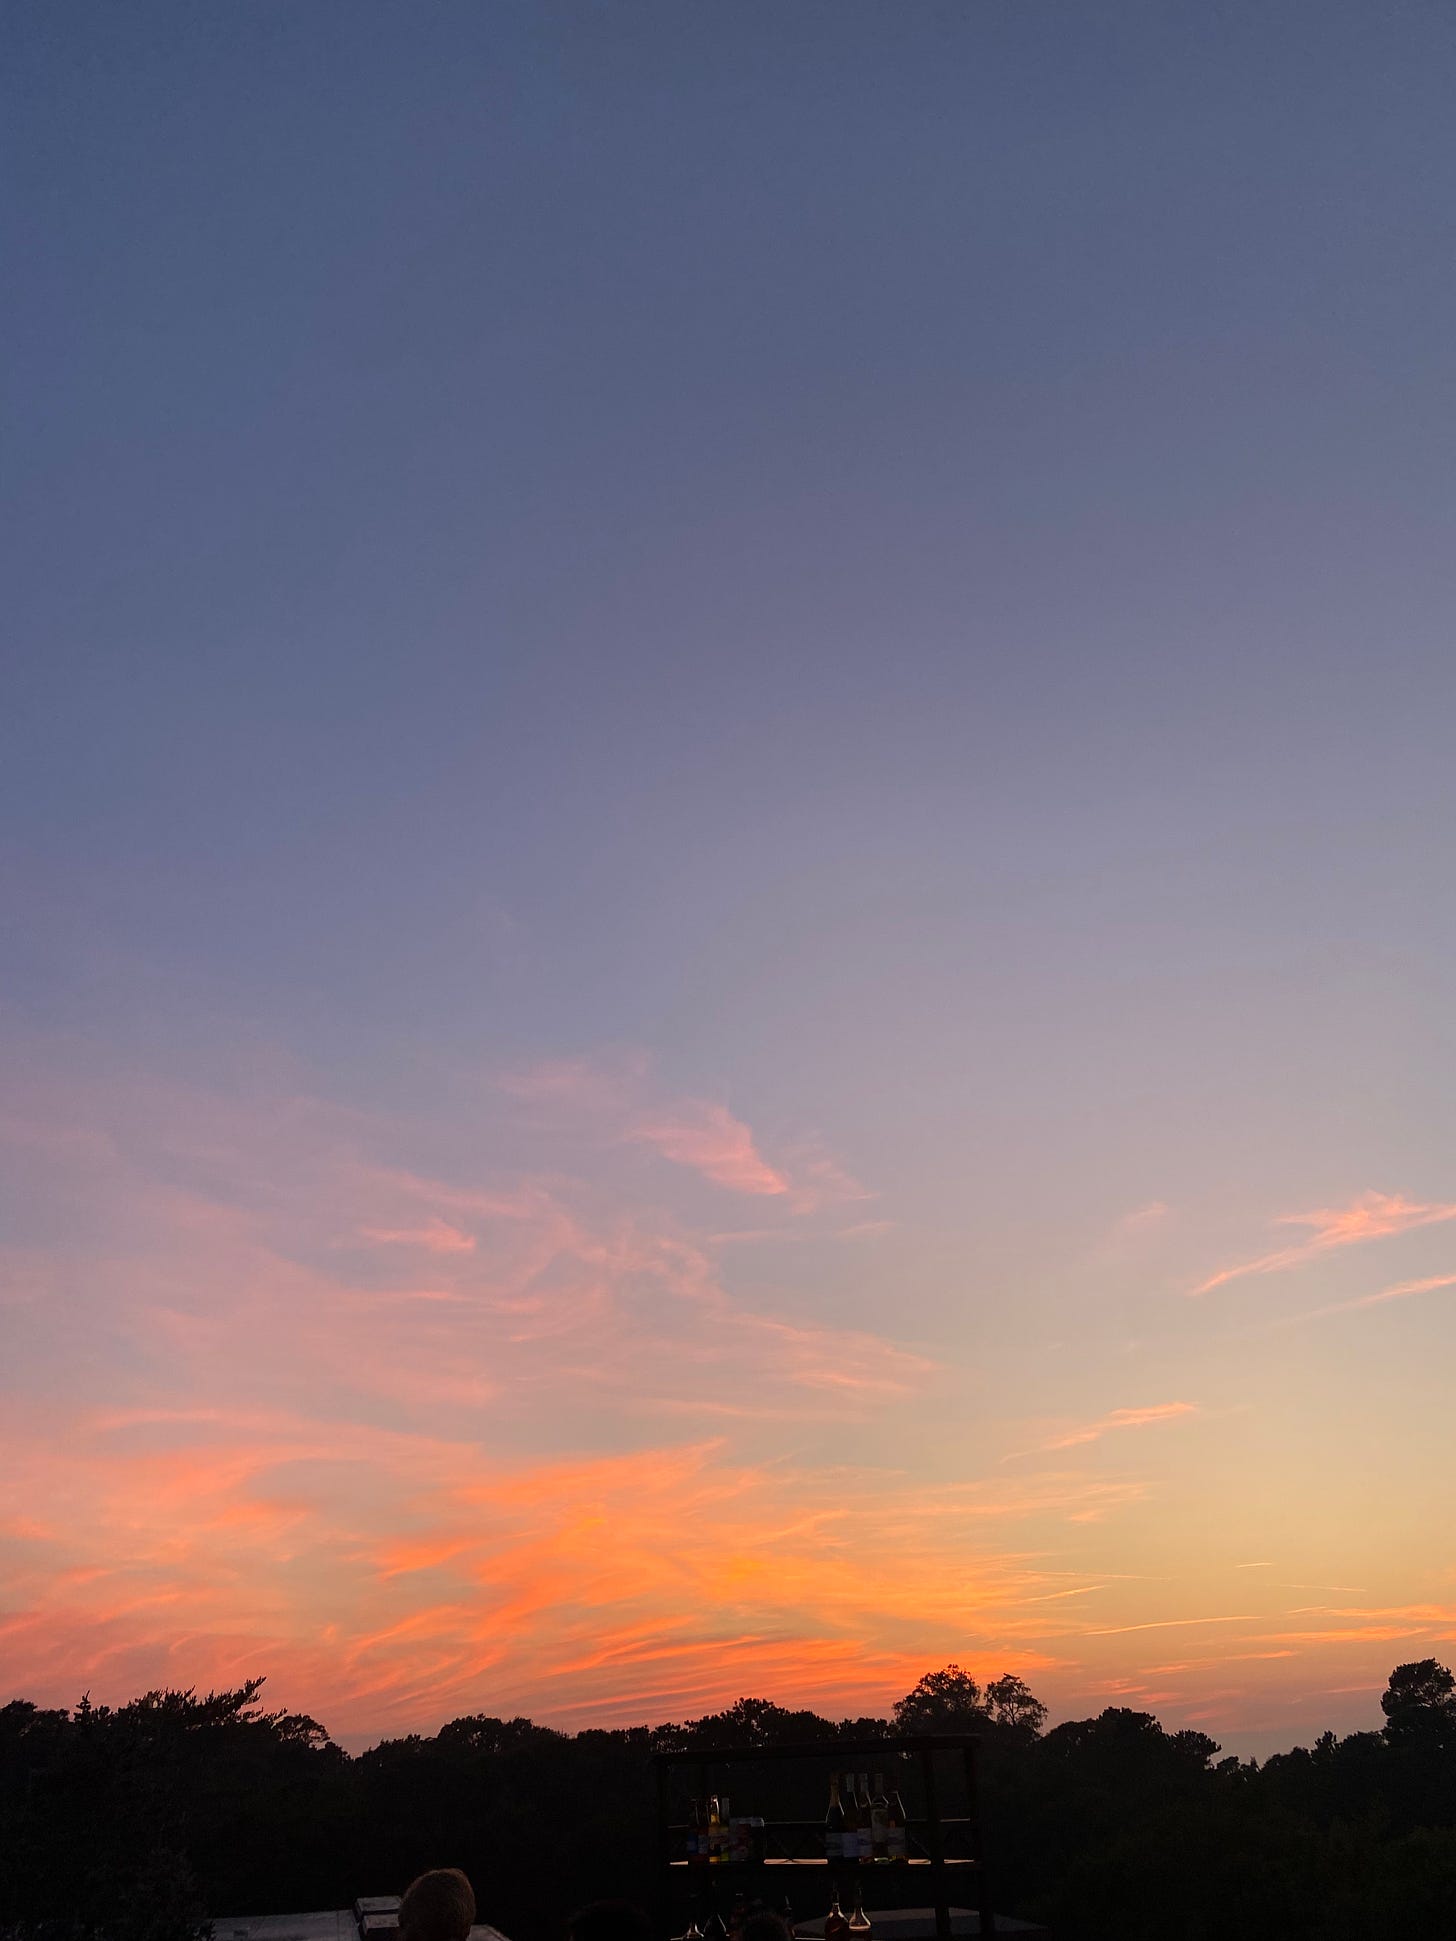 a portrait orientated photo of a sunset with an orange and dark blue sky over the bay